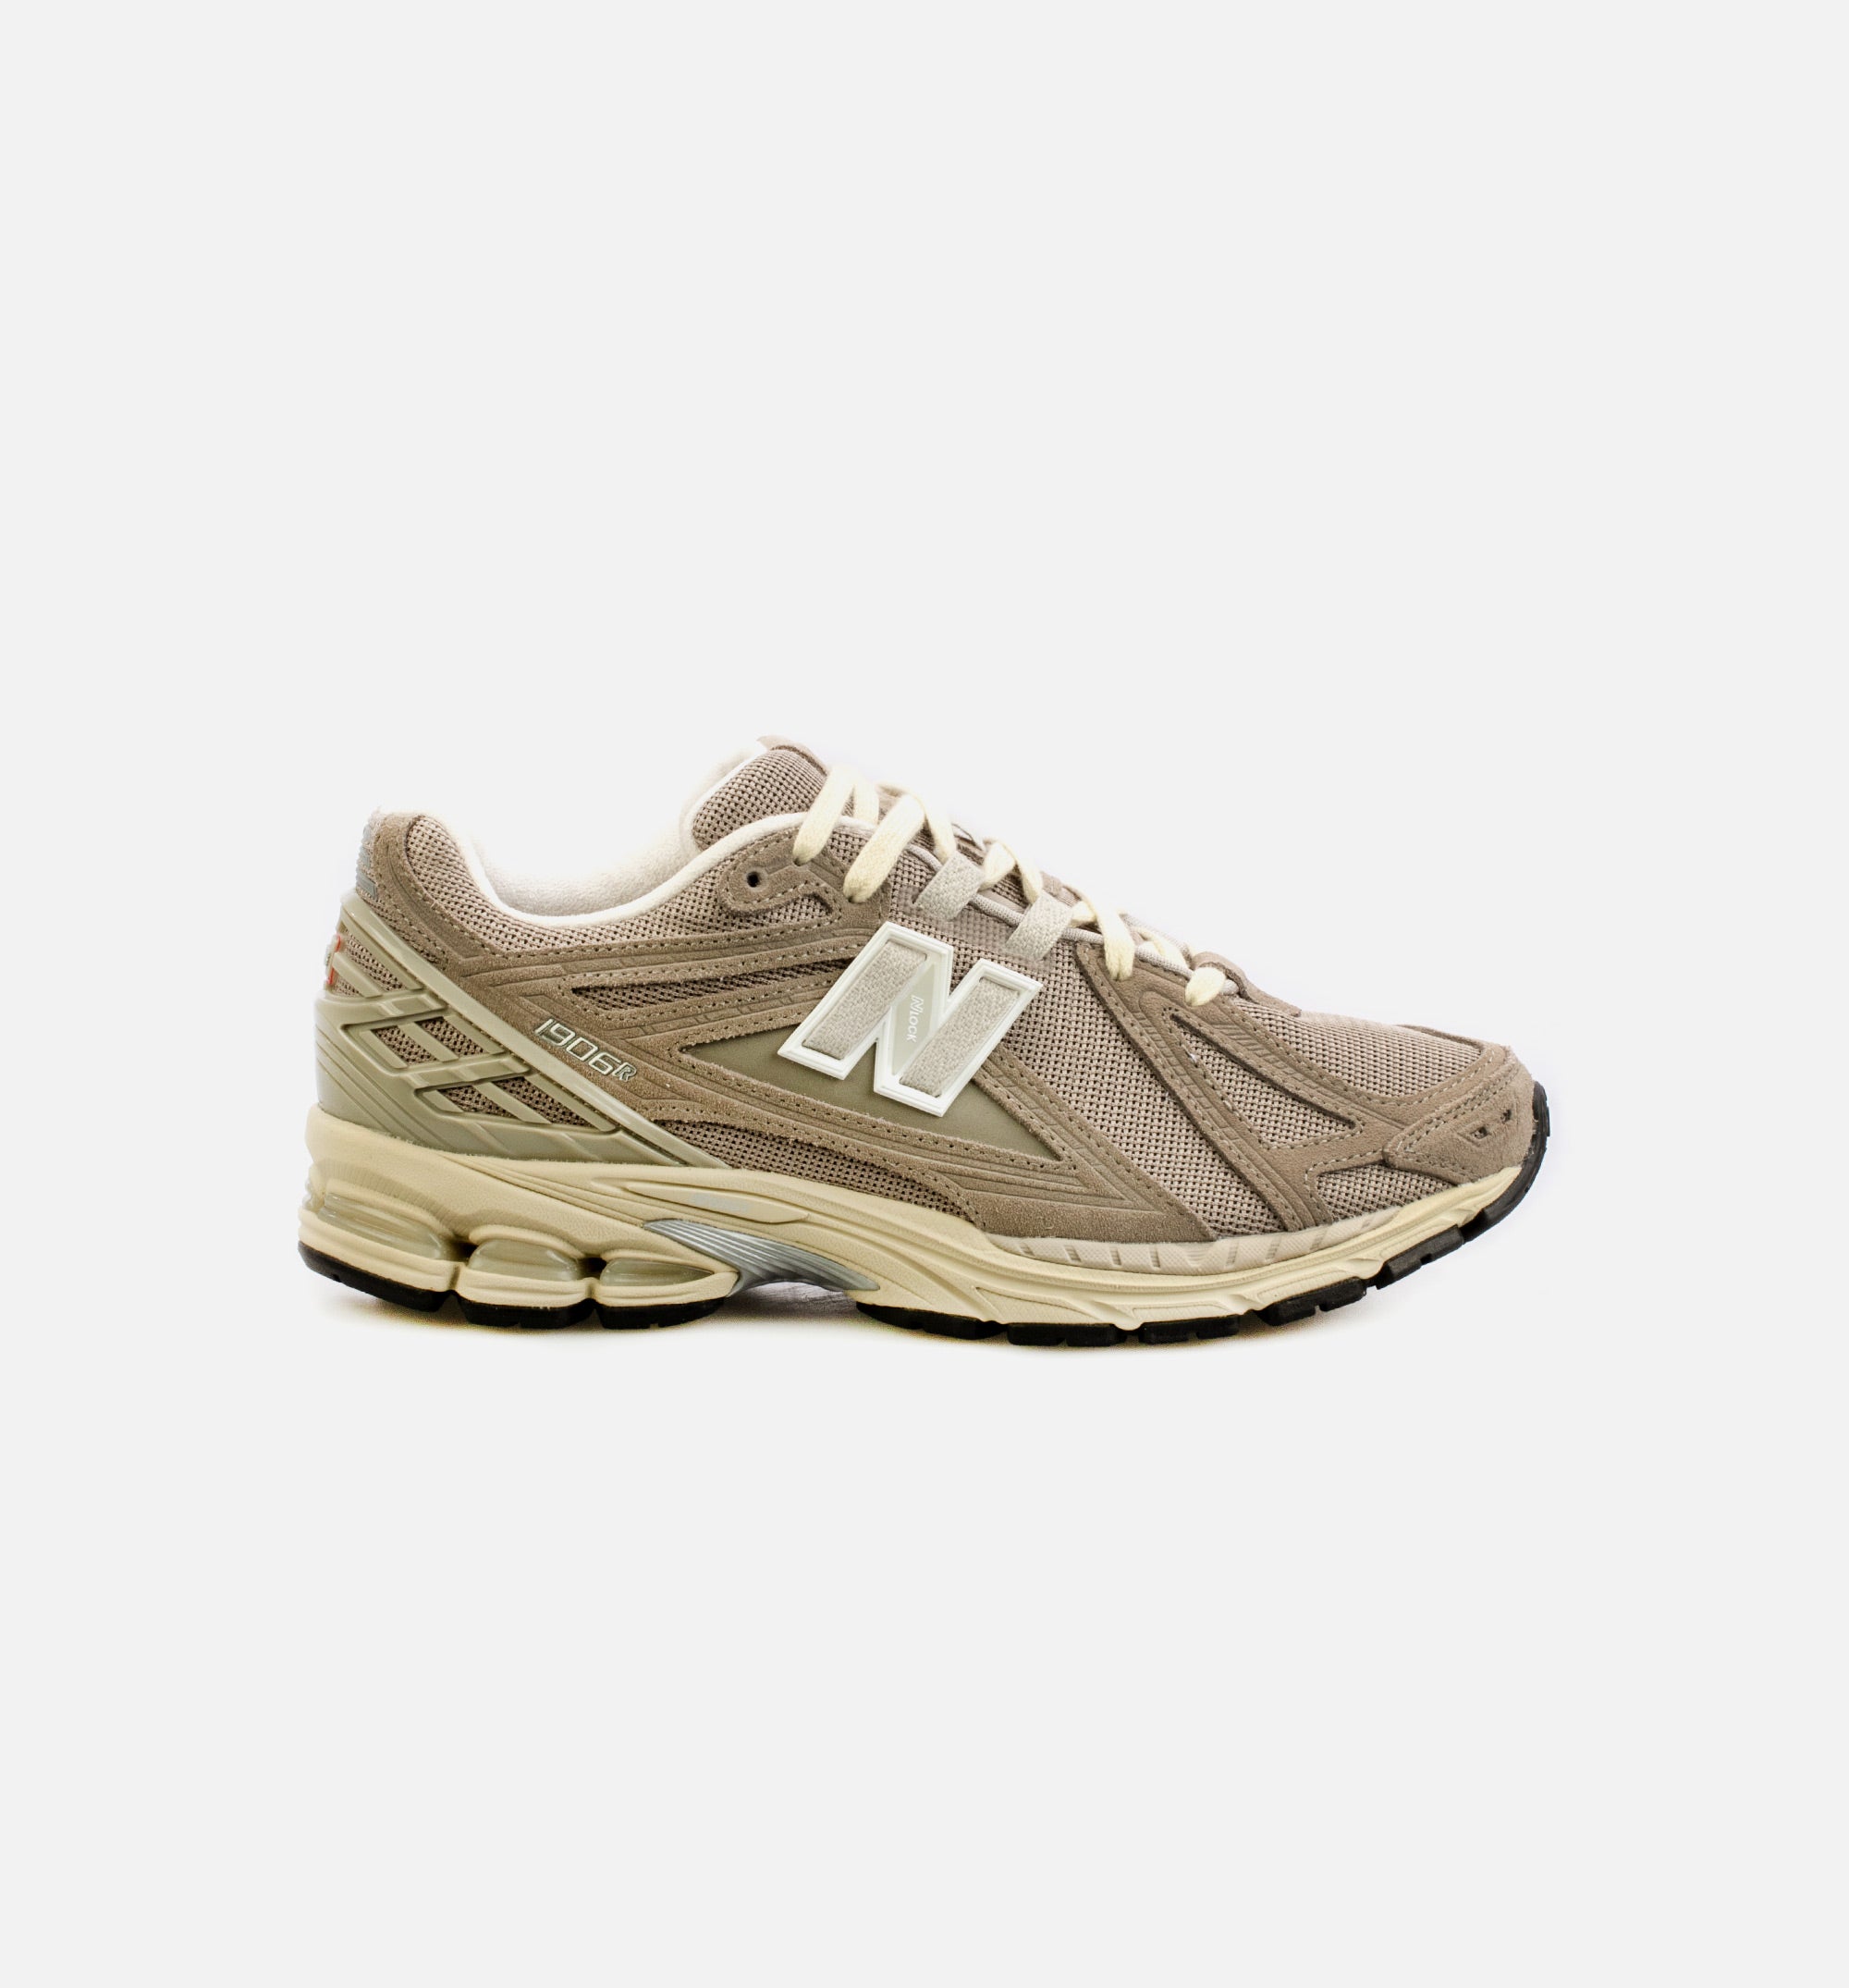 New Balance unveils the world's ugliest shoes